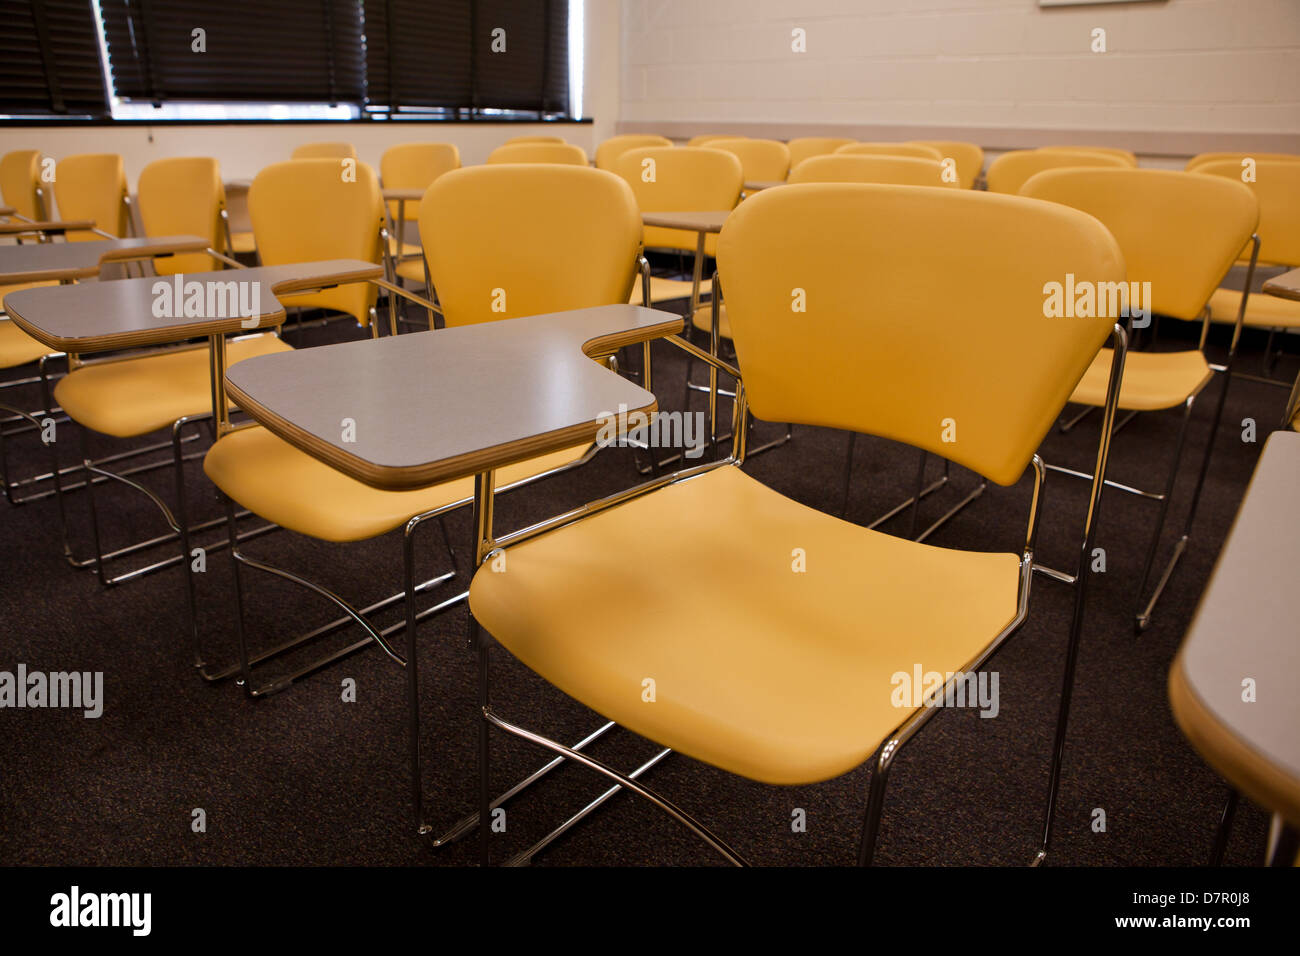 Empty classroom desks and chairs - USA Stock Photo